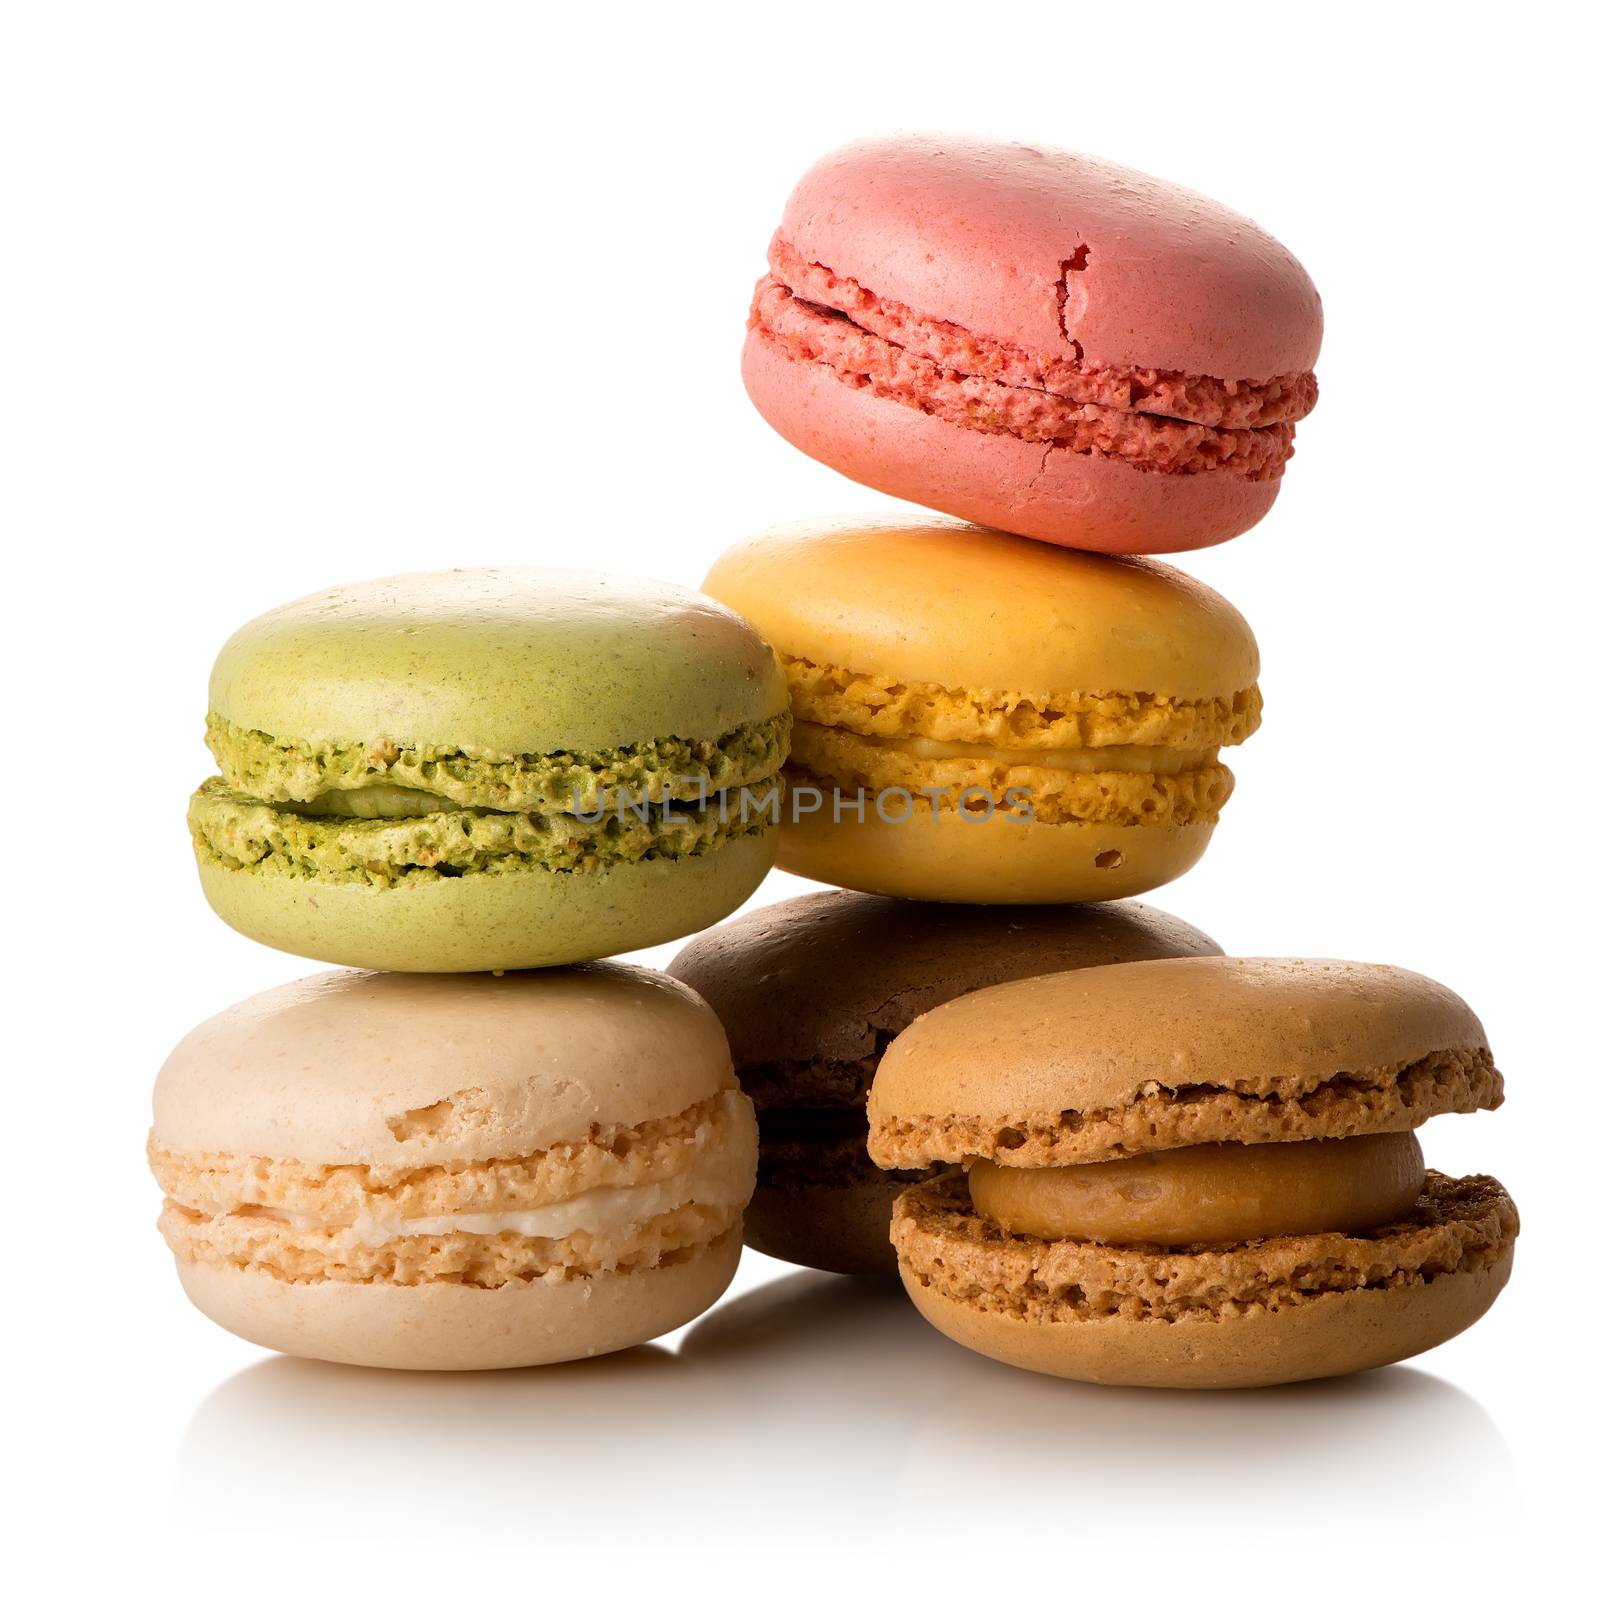 Colorful french macarons isolated on a white backgroud